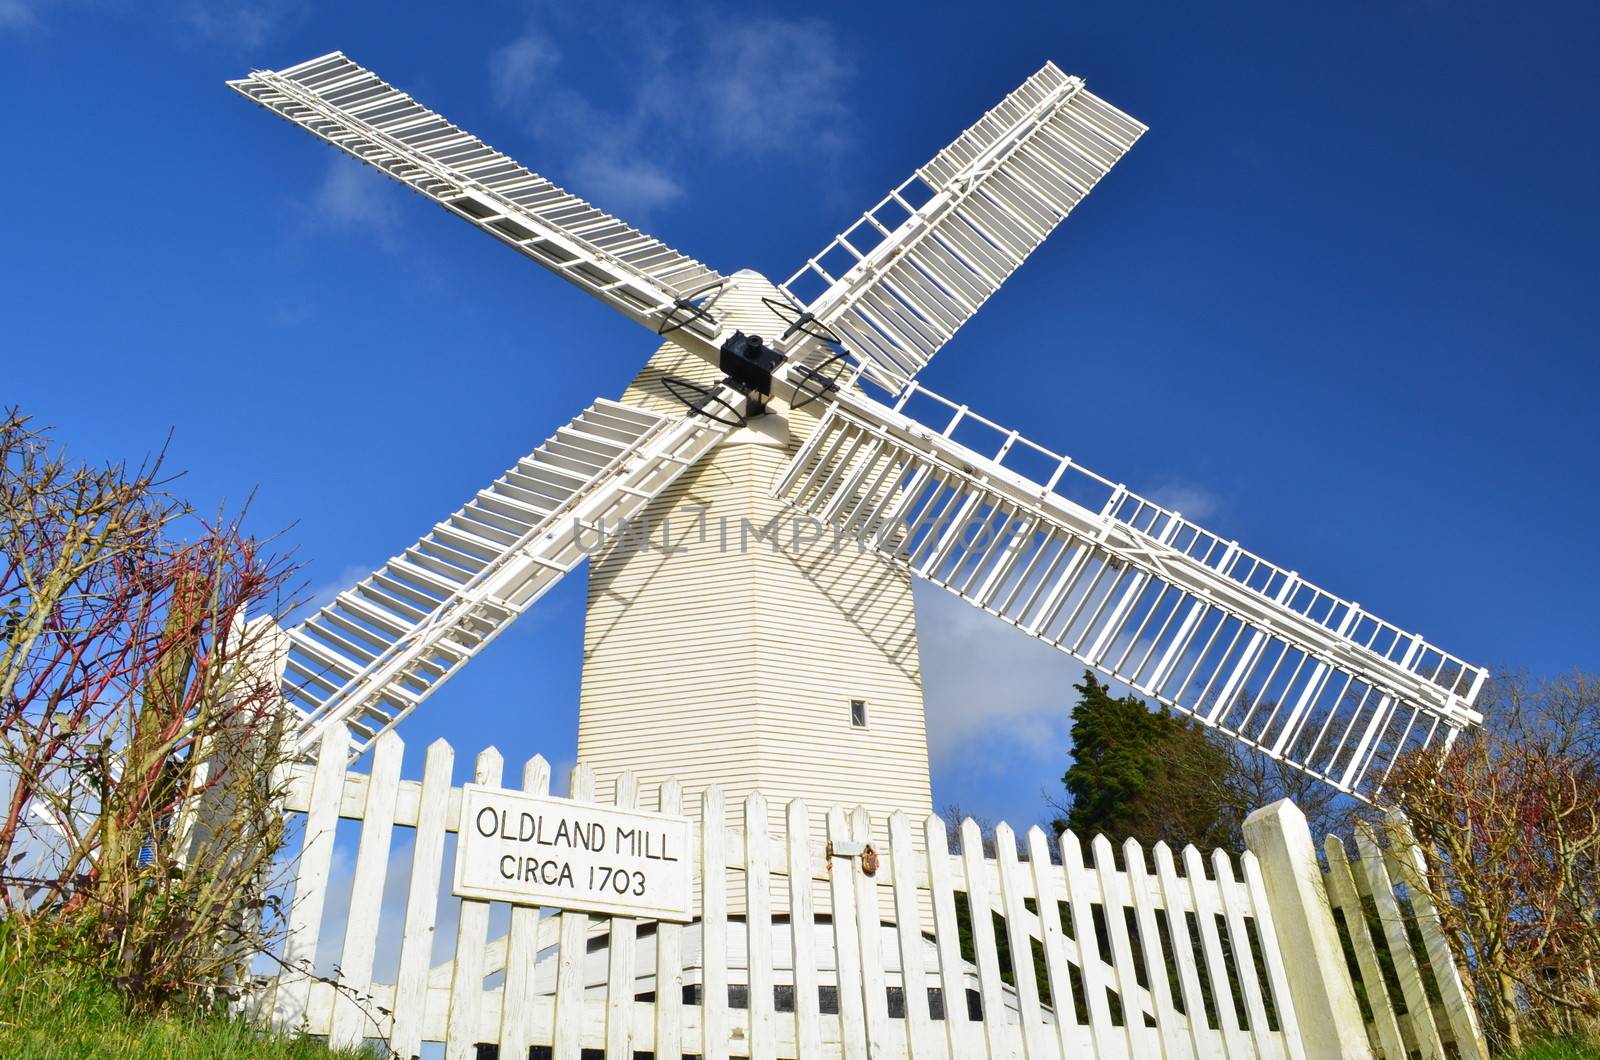 Oldland mill at Keymer Sussex,England. Built early 1700 this fine post mill is now restored to its former glory.